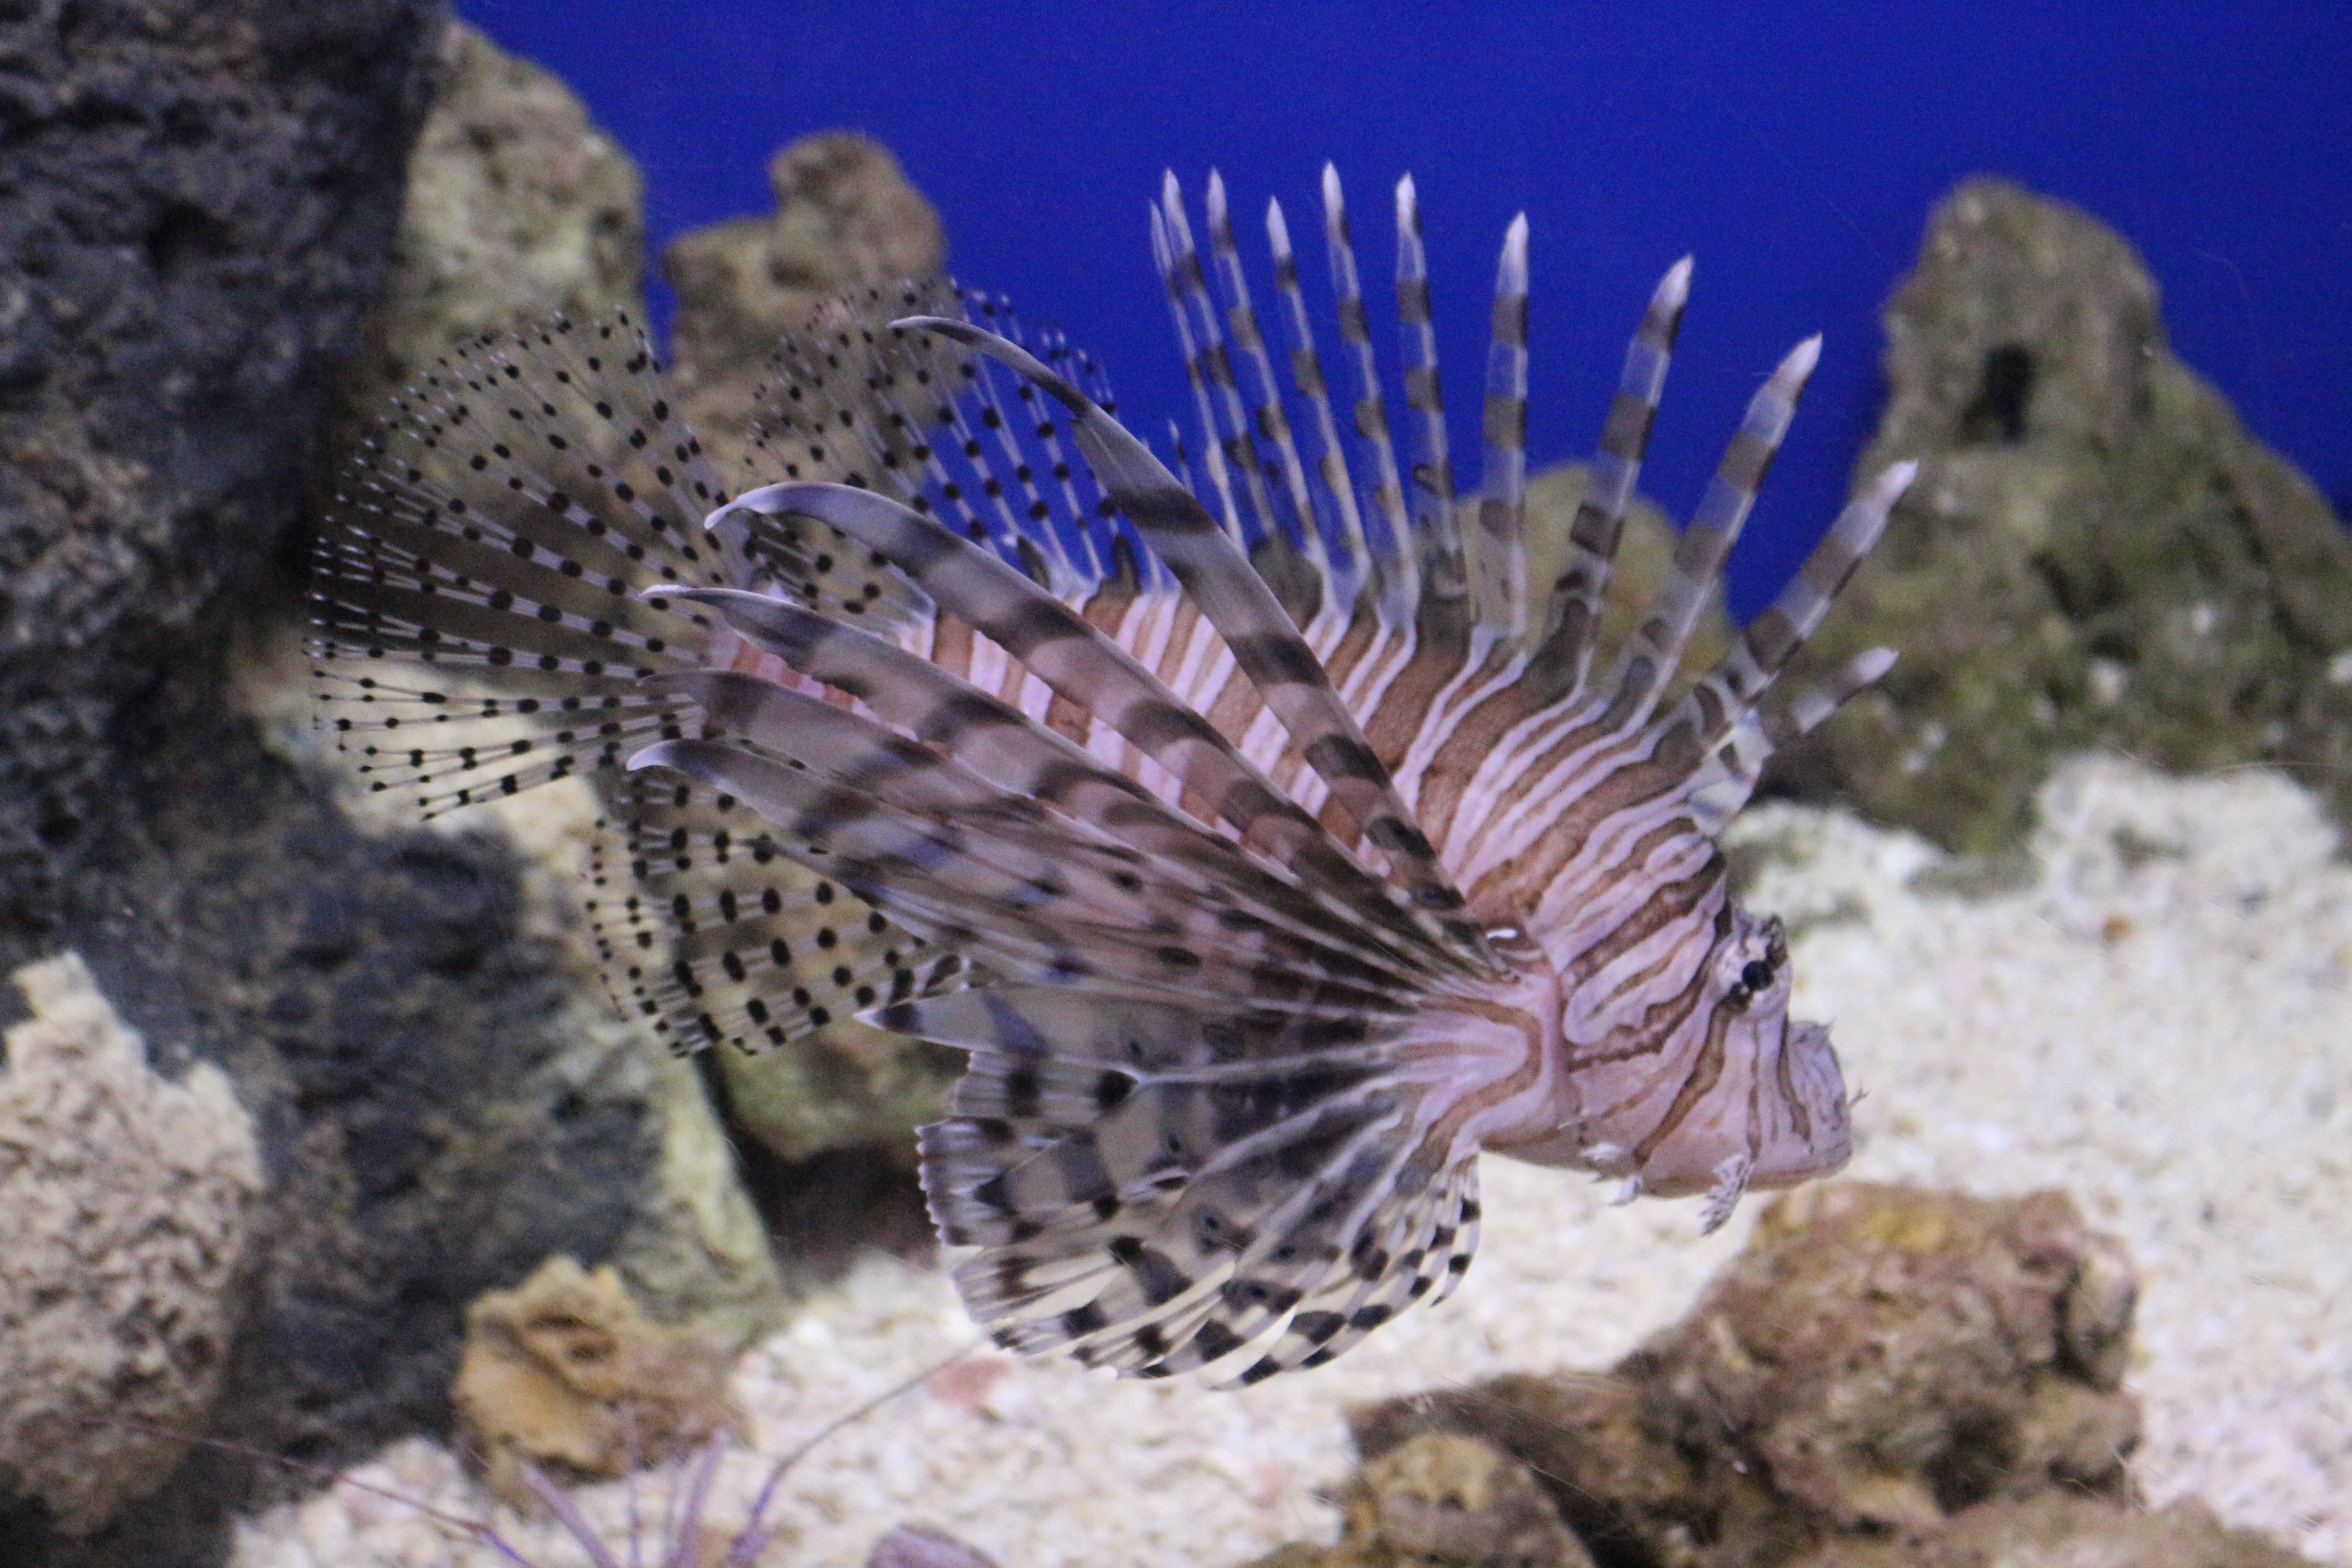 Lionfish Challenge winners, facts, myths